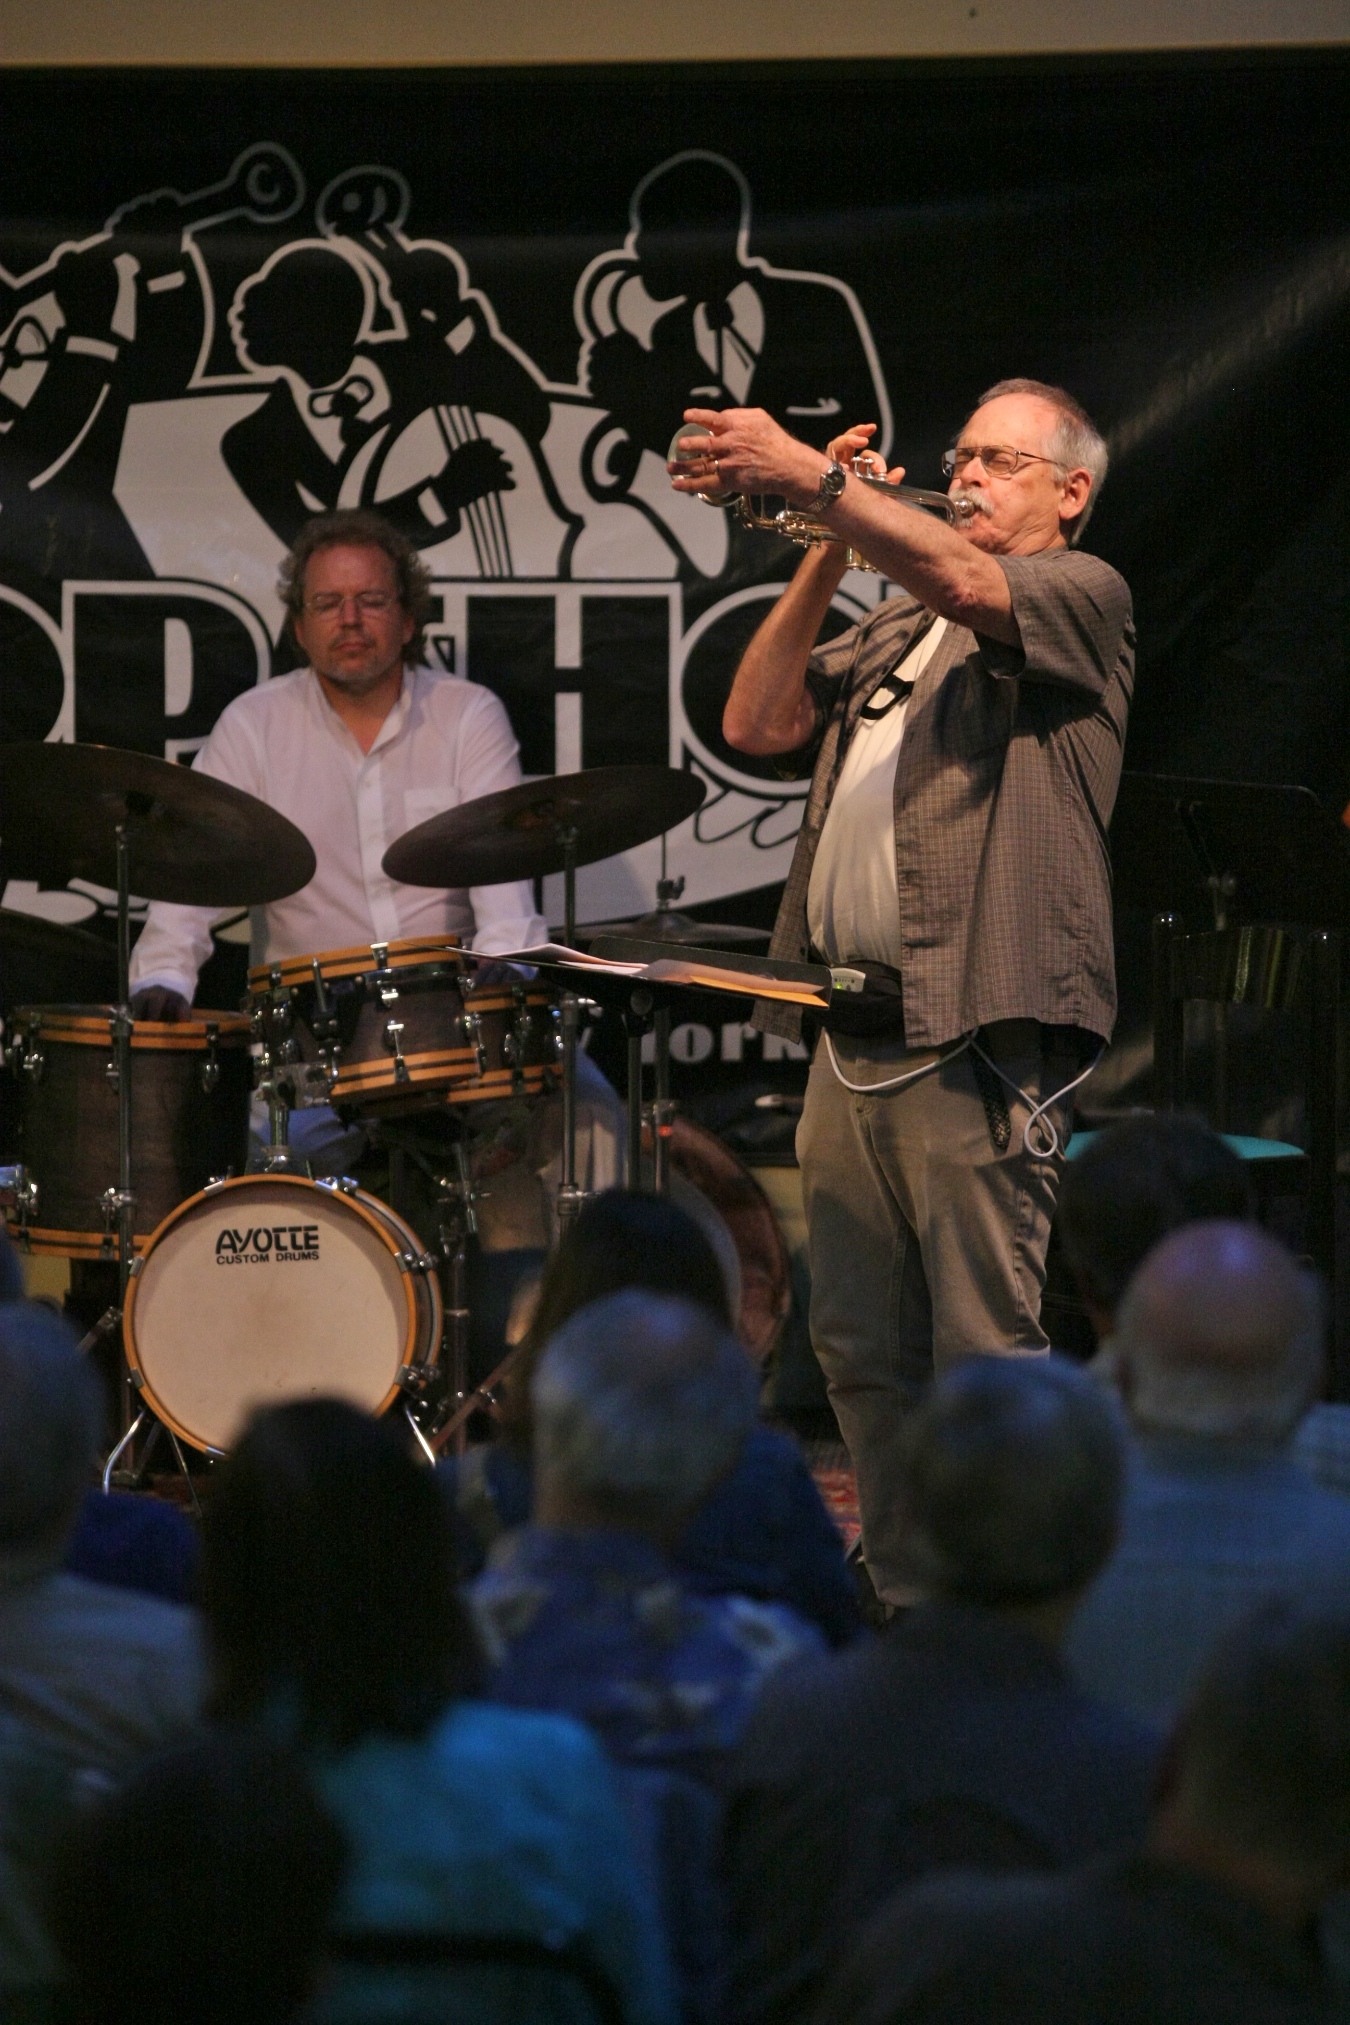 Paul Smoker playing trumpet, with his hand over the bell, possibly holding a mute, with Phil Haynes playing drums, during a concert